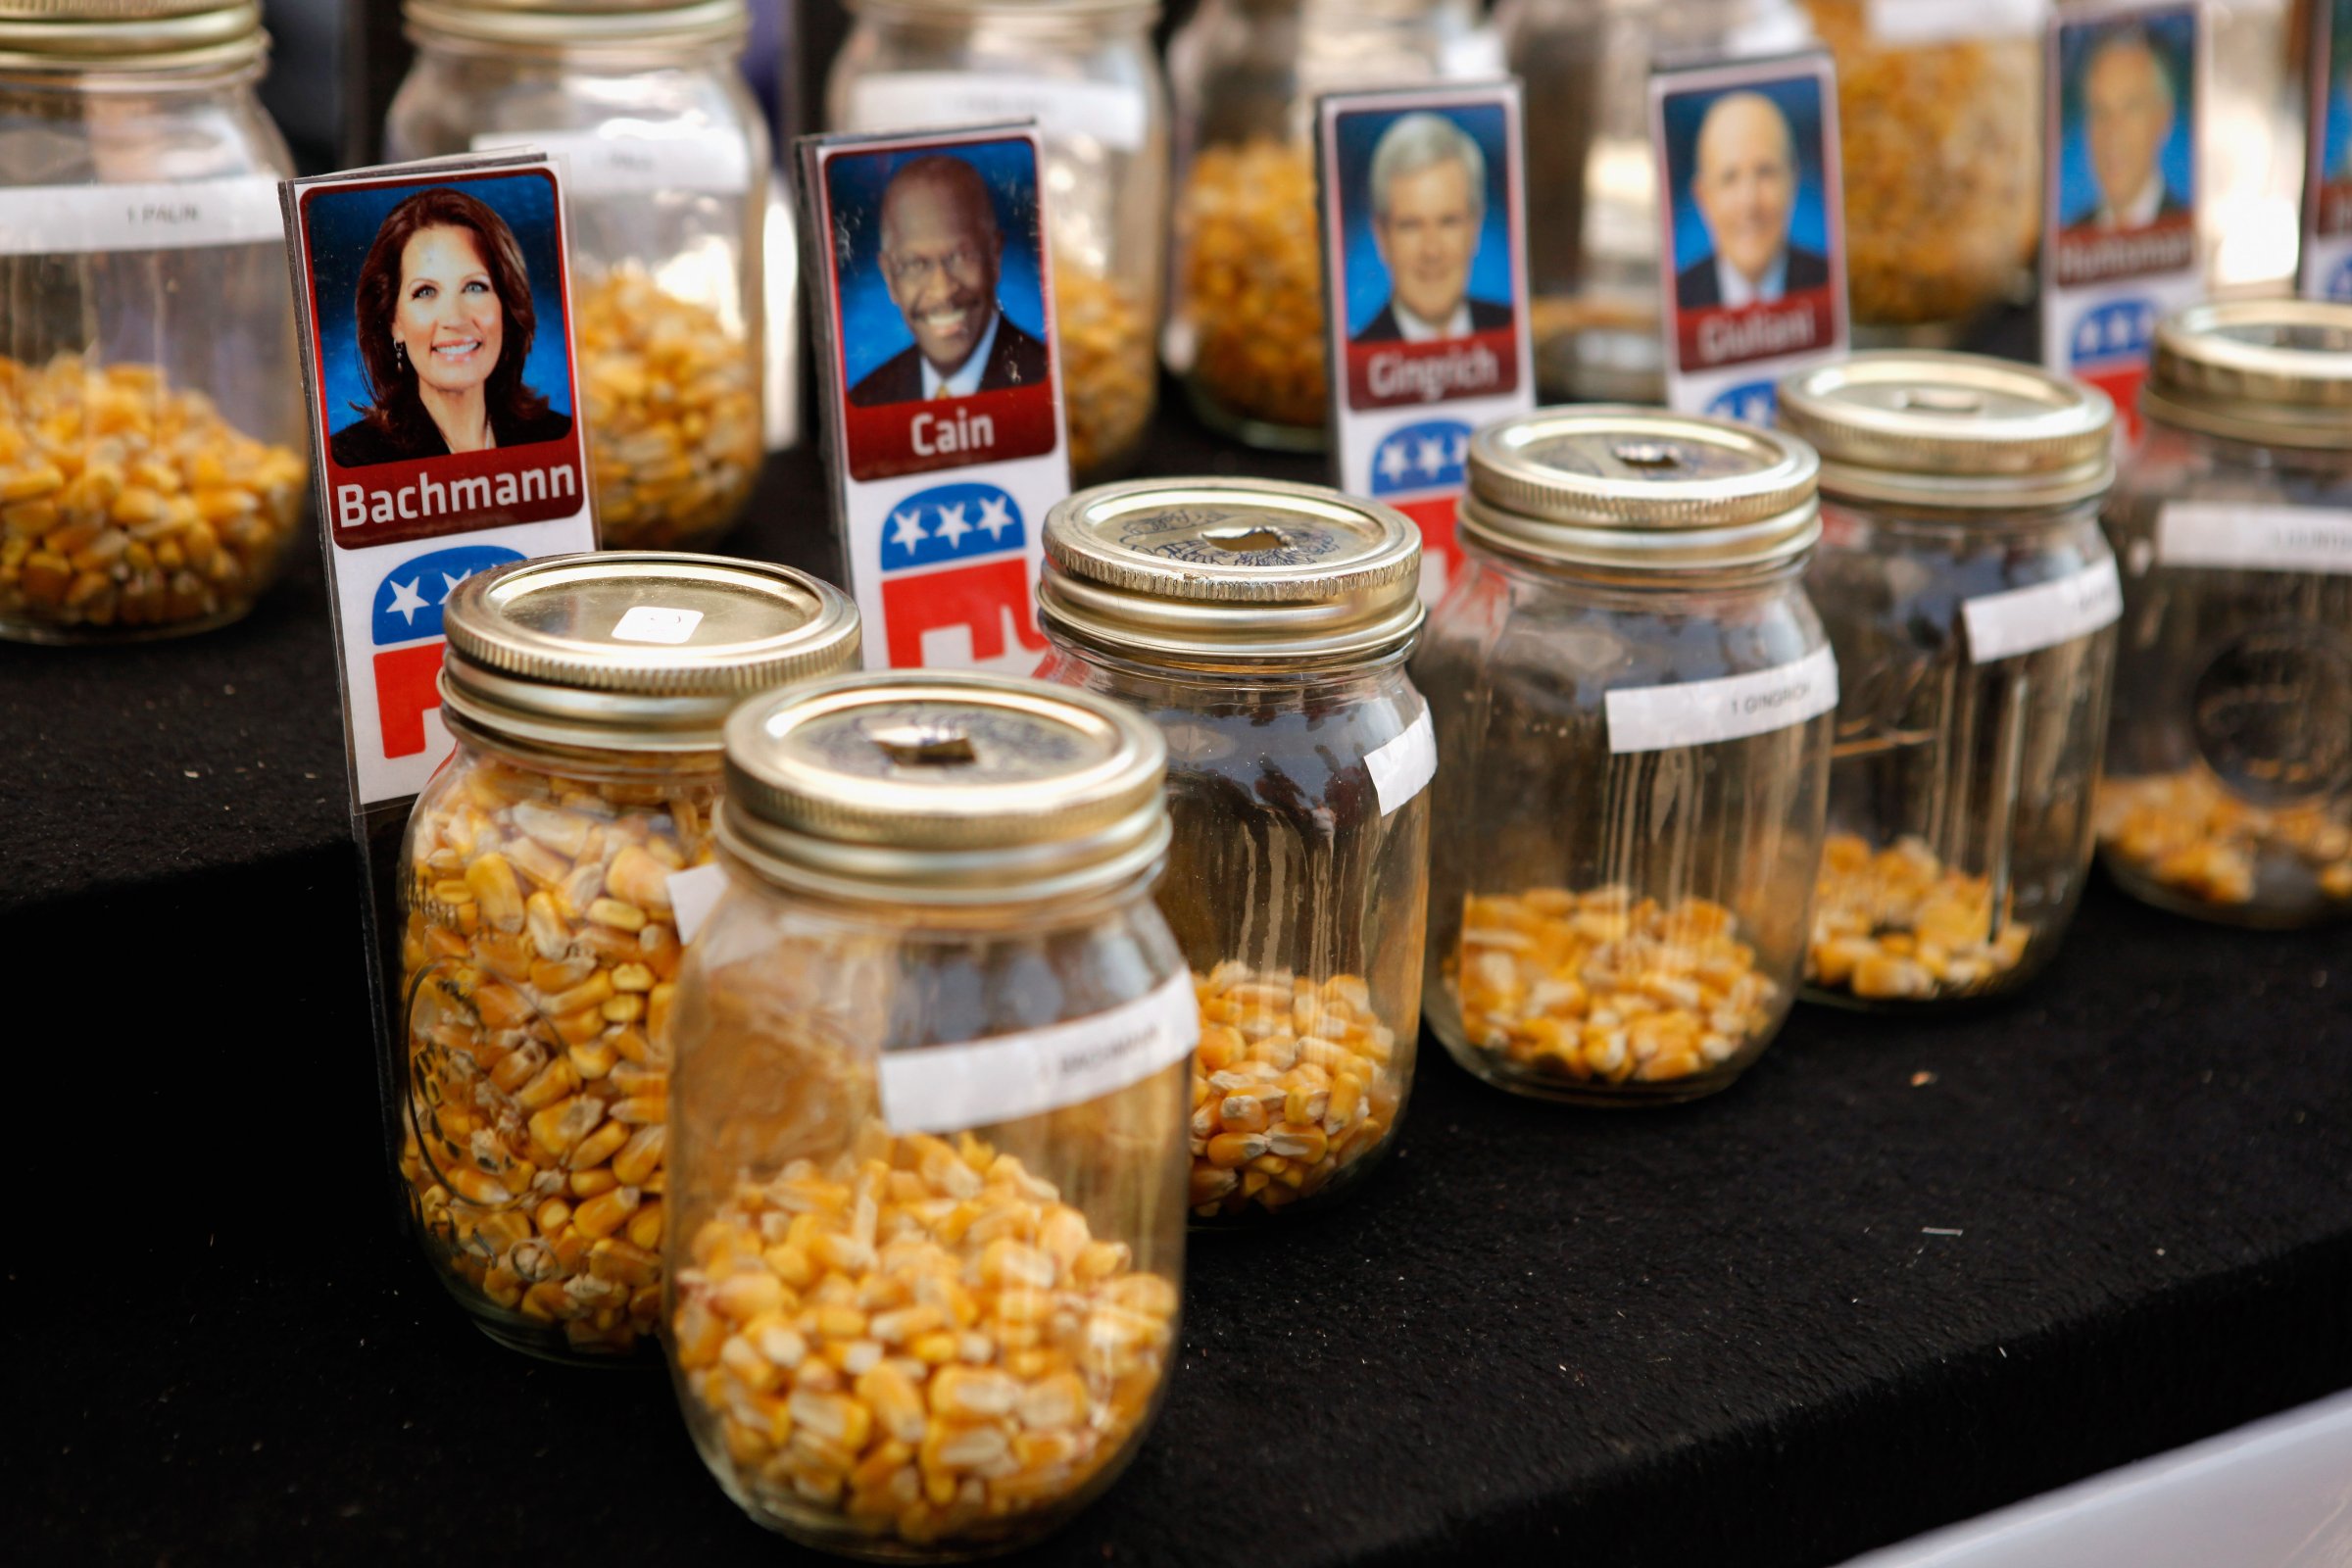 Fairgoers over the age of 18 are invited to drop one piece of corn into one of 14 jars with photos of their favorite Republican presidential candidate during the second day of the Iowa State Fair ahead of the Iowa Straw Poll on Aug. 12, 2011 in Des Moines, Iowa.